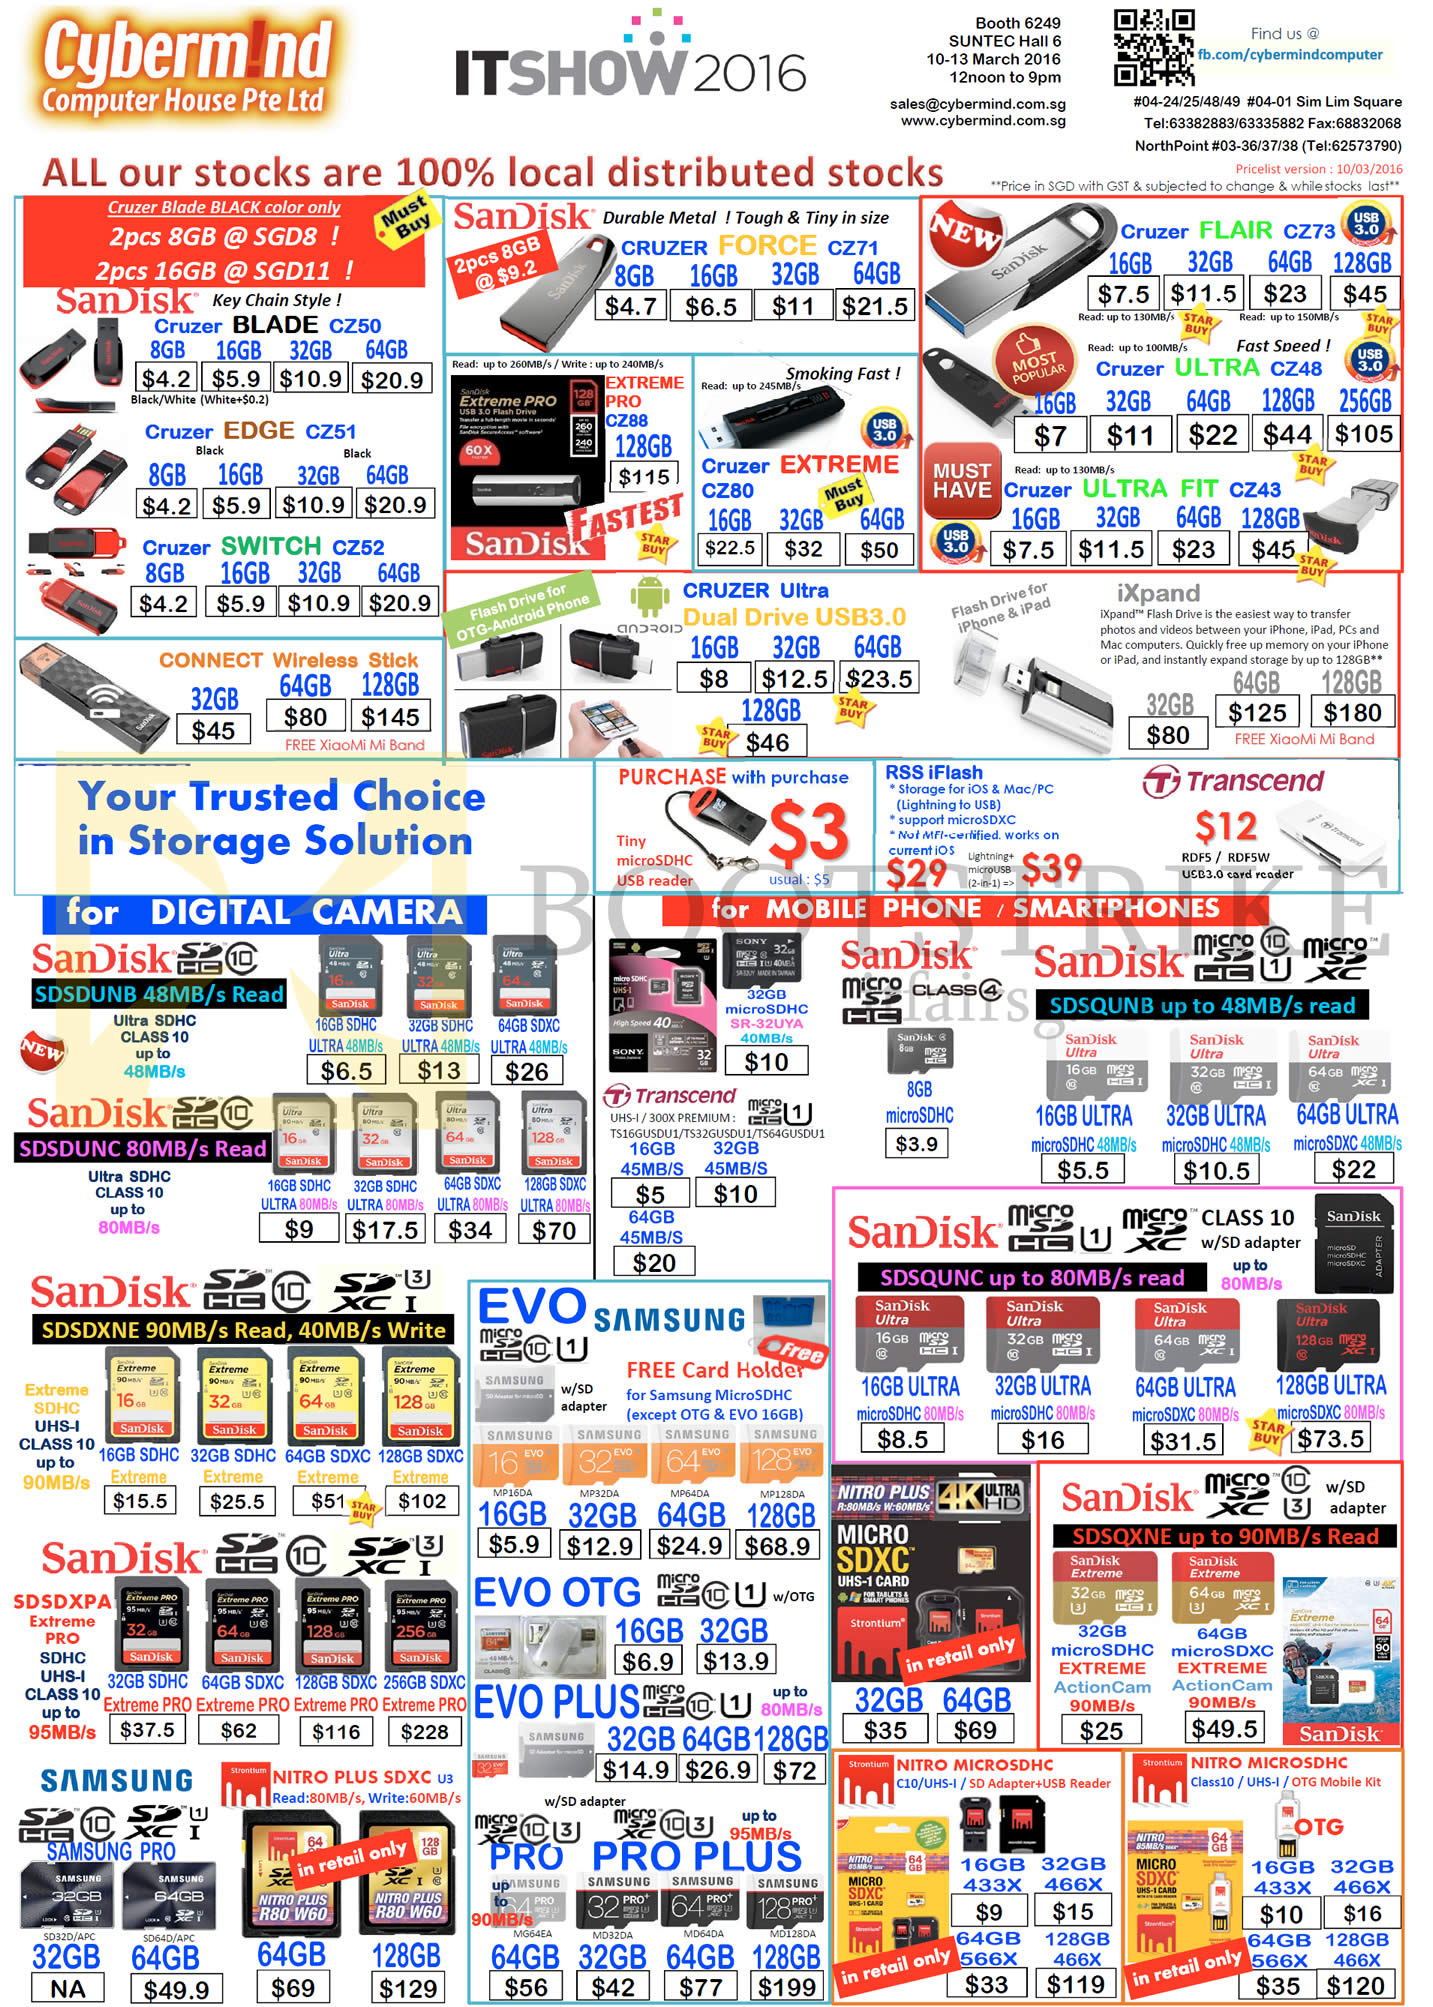 IT SHOW 2016 price list image brochure of Cybermind Flash Drives, Storage Solutions, Sandisk, Samsung, Cruzer Blade, Edge, Switch, Force, Flair, Ultra, Ultra Fit, Extreme Pro